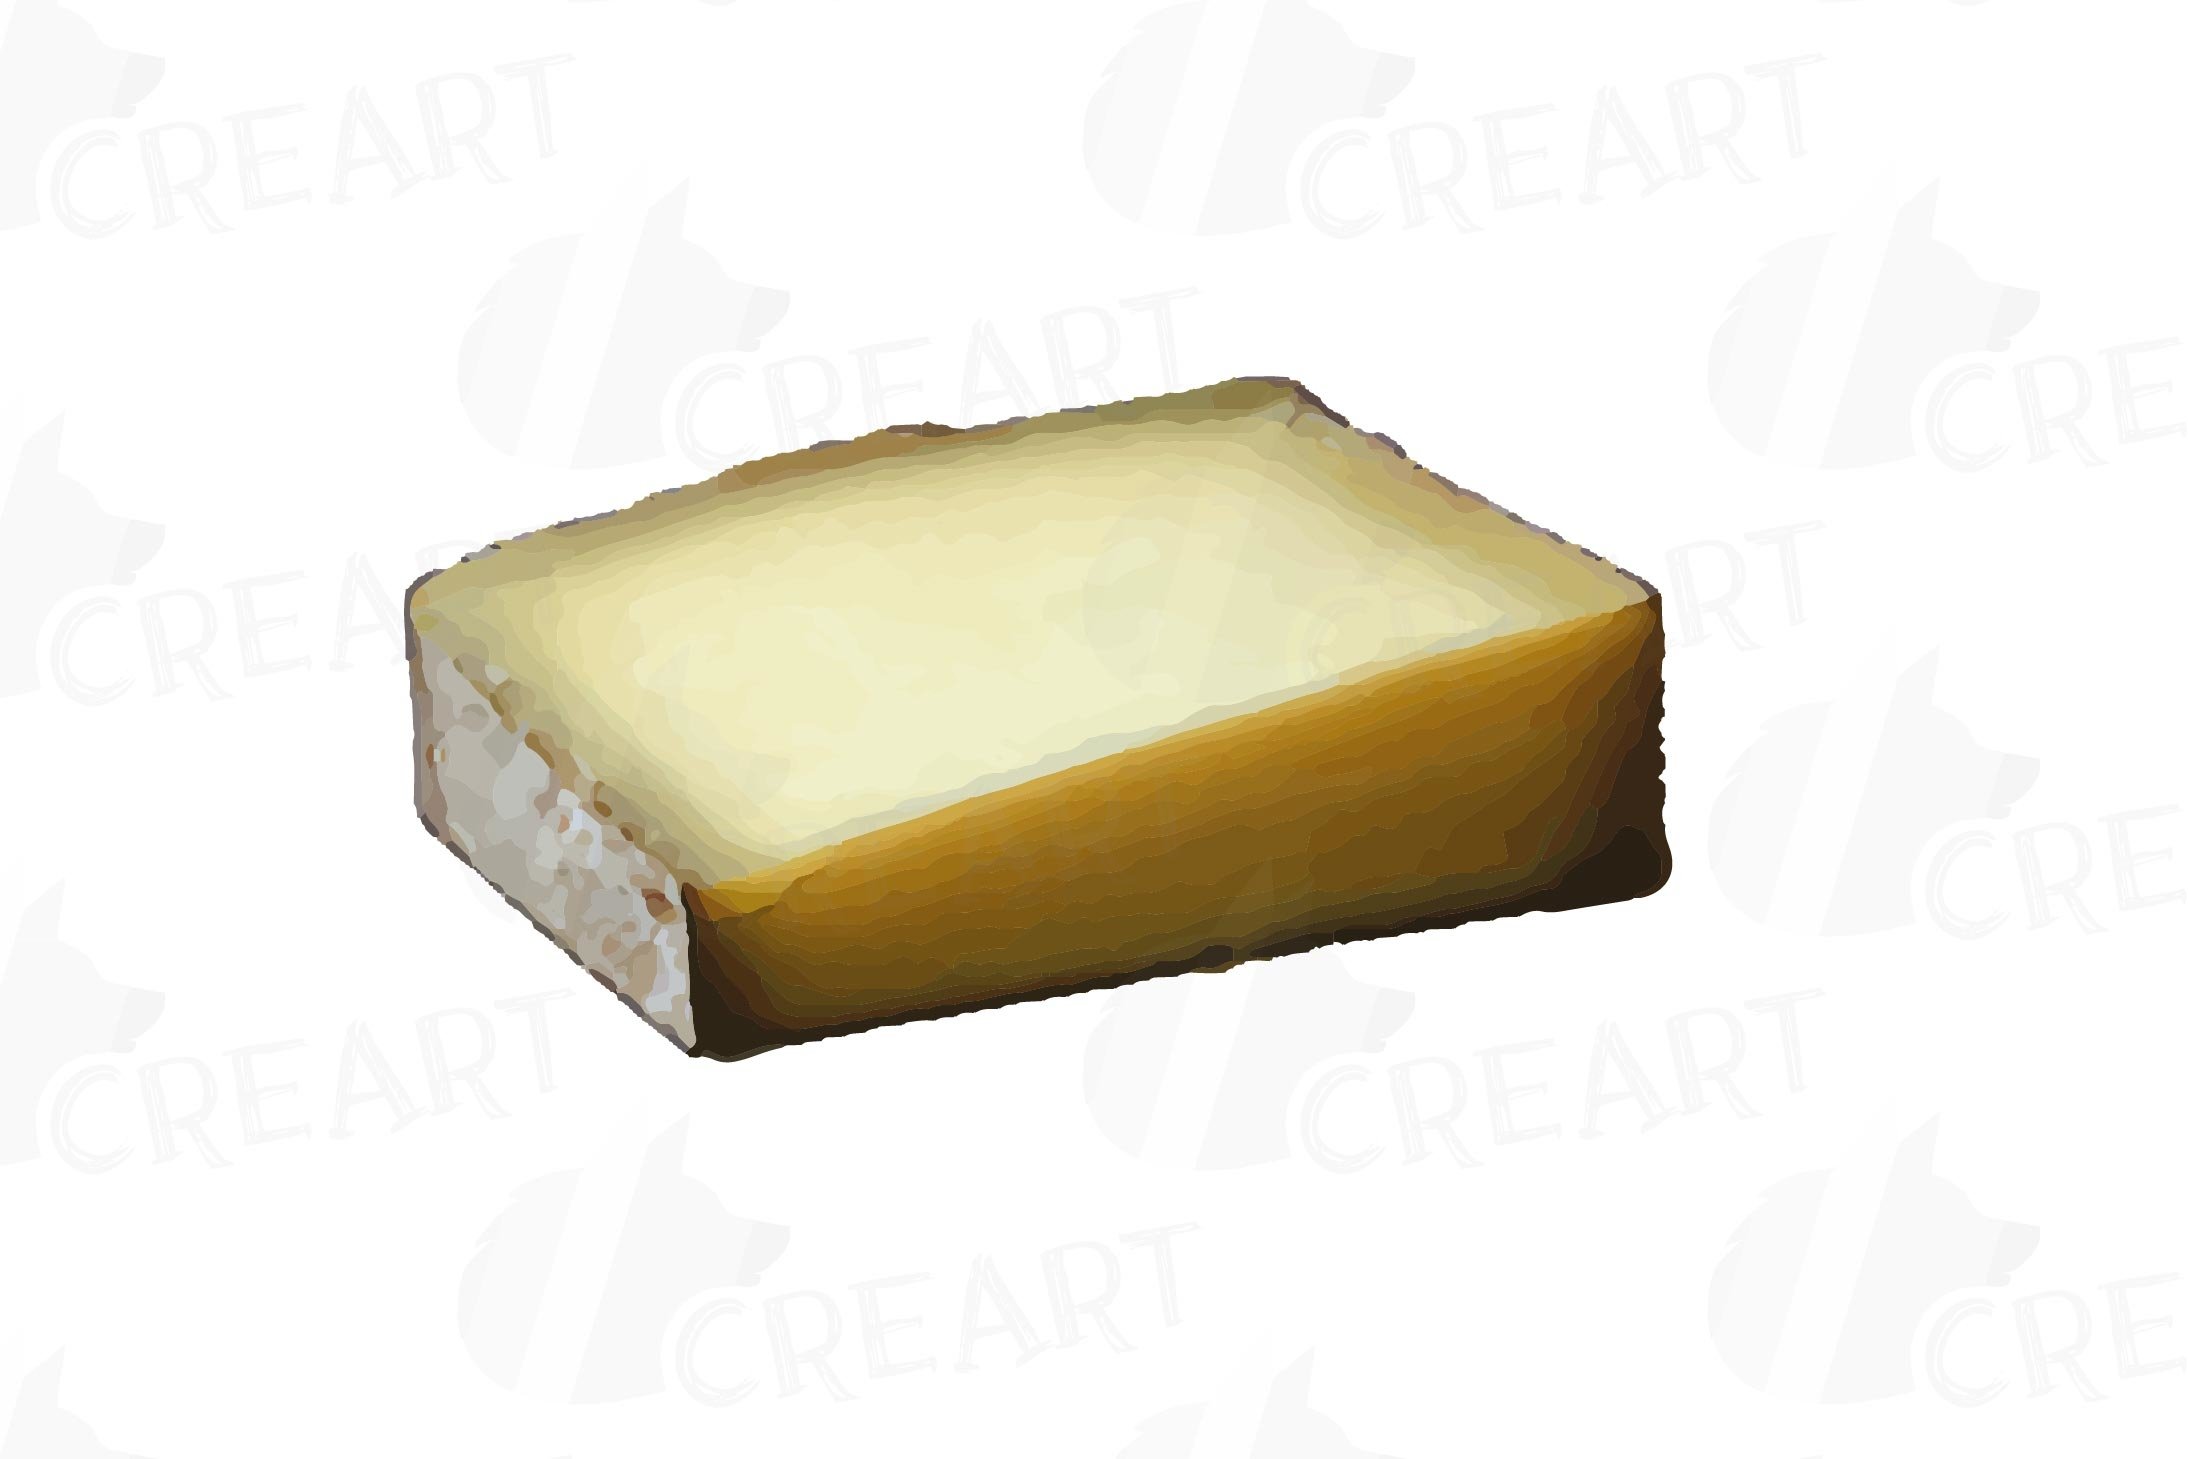 Adorable image of swiss cheese on white background.